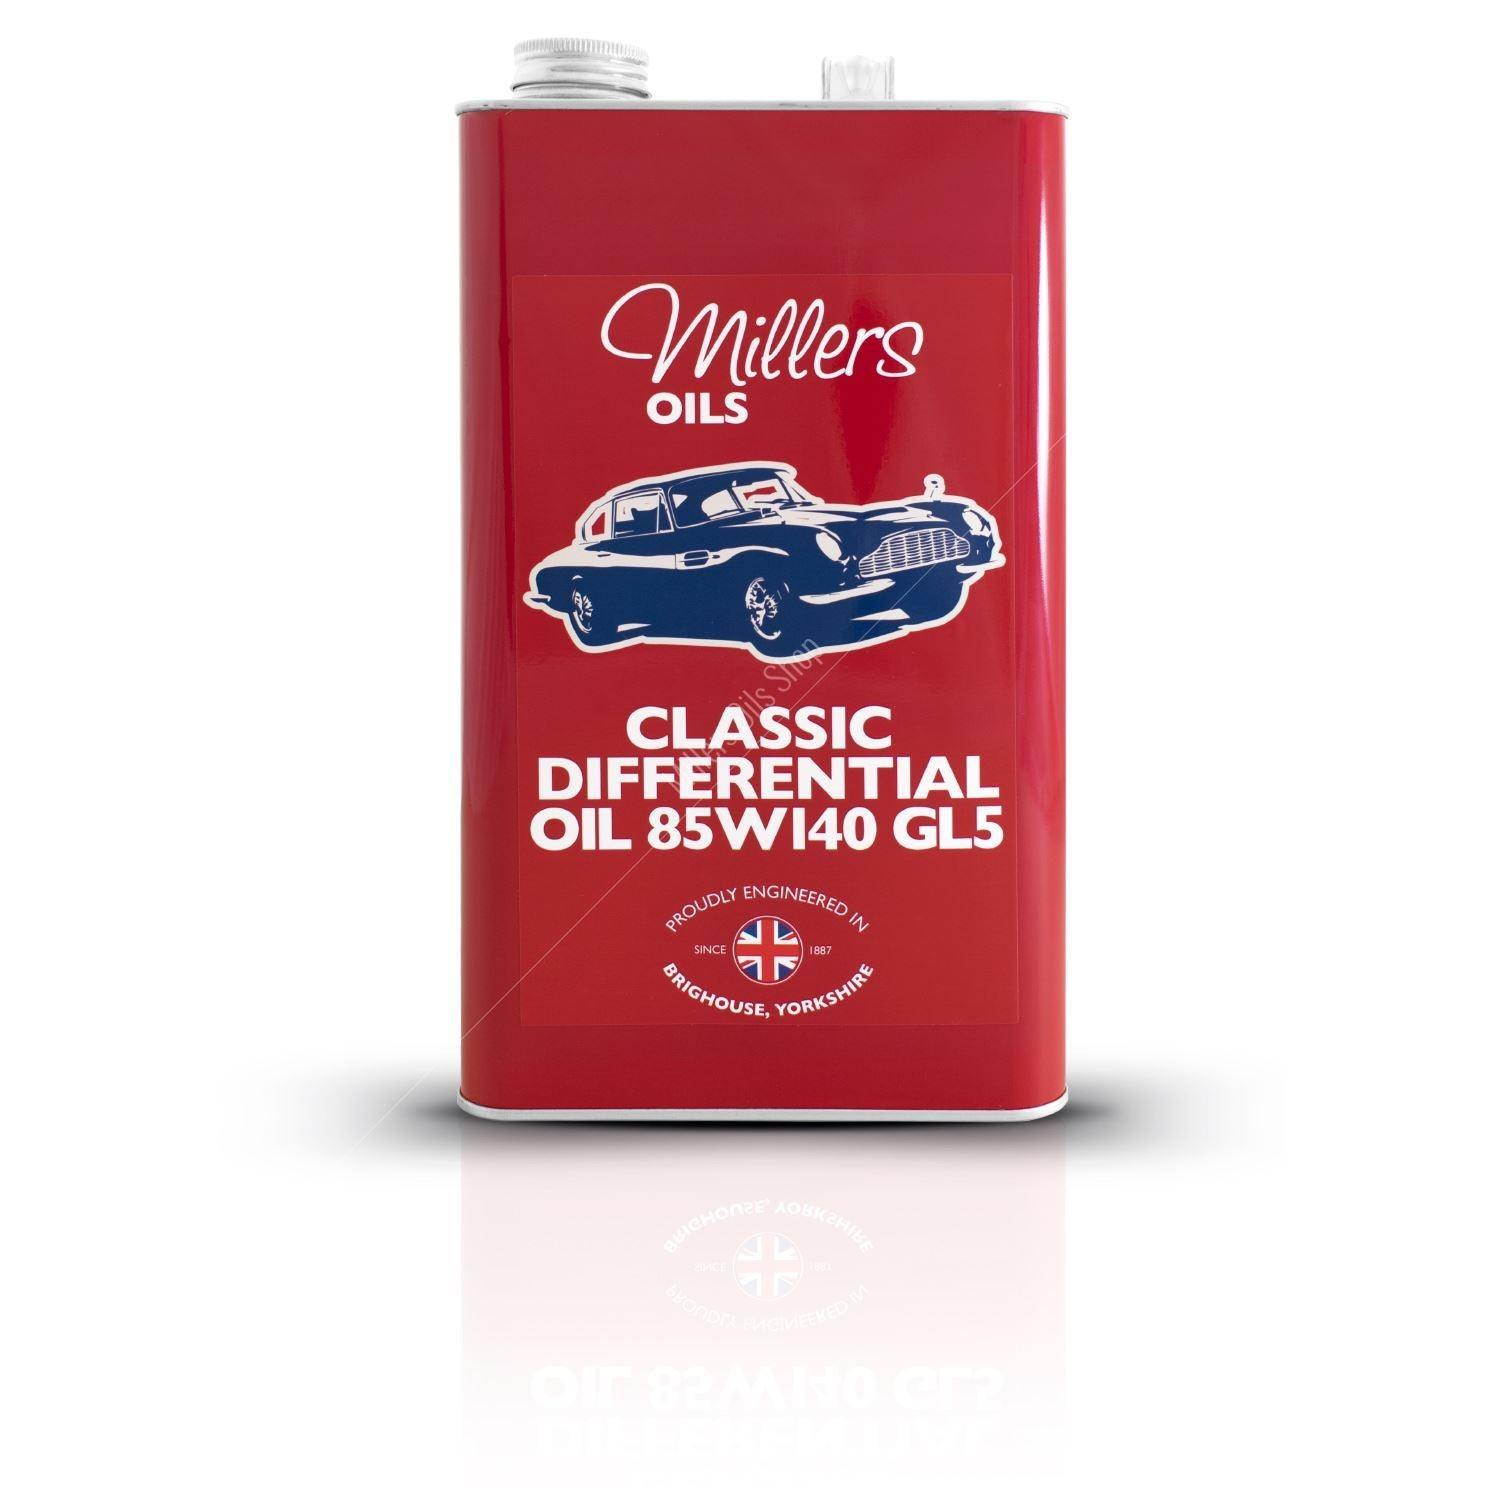 Classic Differential Oil 85w140 GL5 25 liter verpakking - Berry Smink British Car Parts